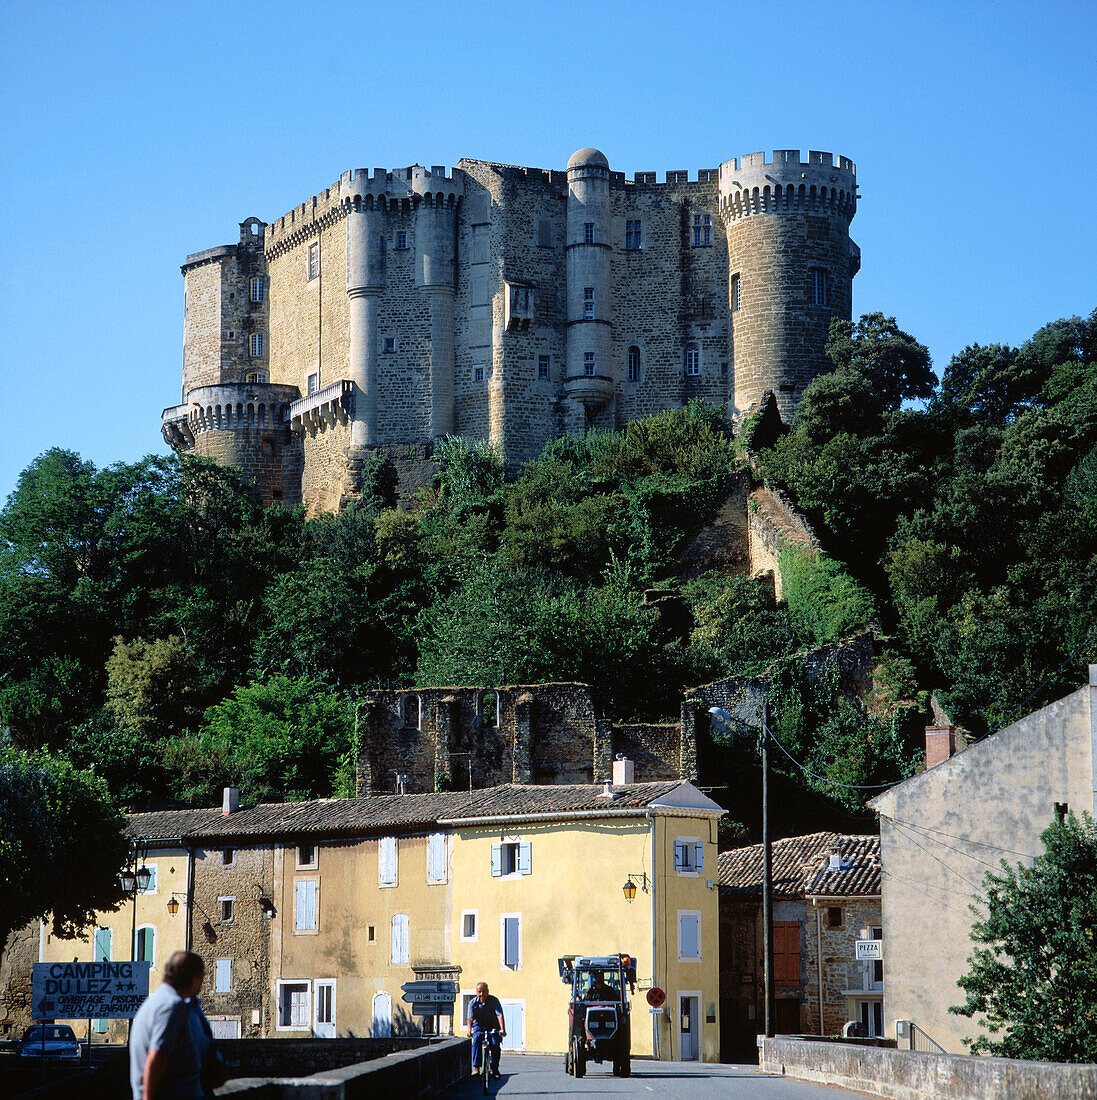 Houses and medieval castle in Suze la Rousse. Provence. France